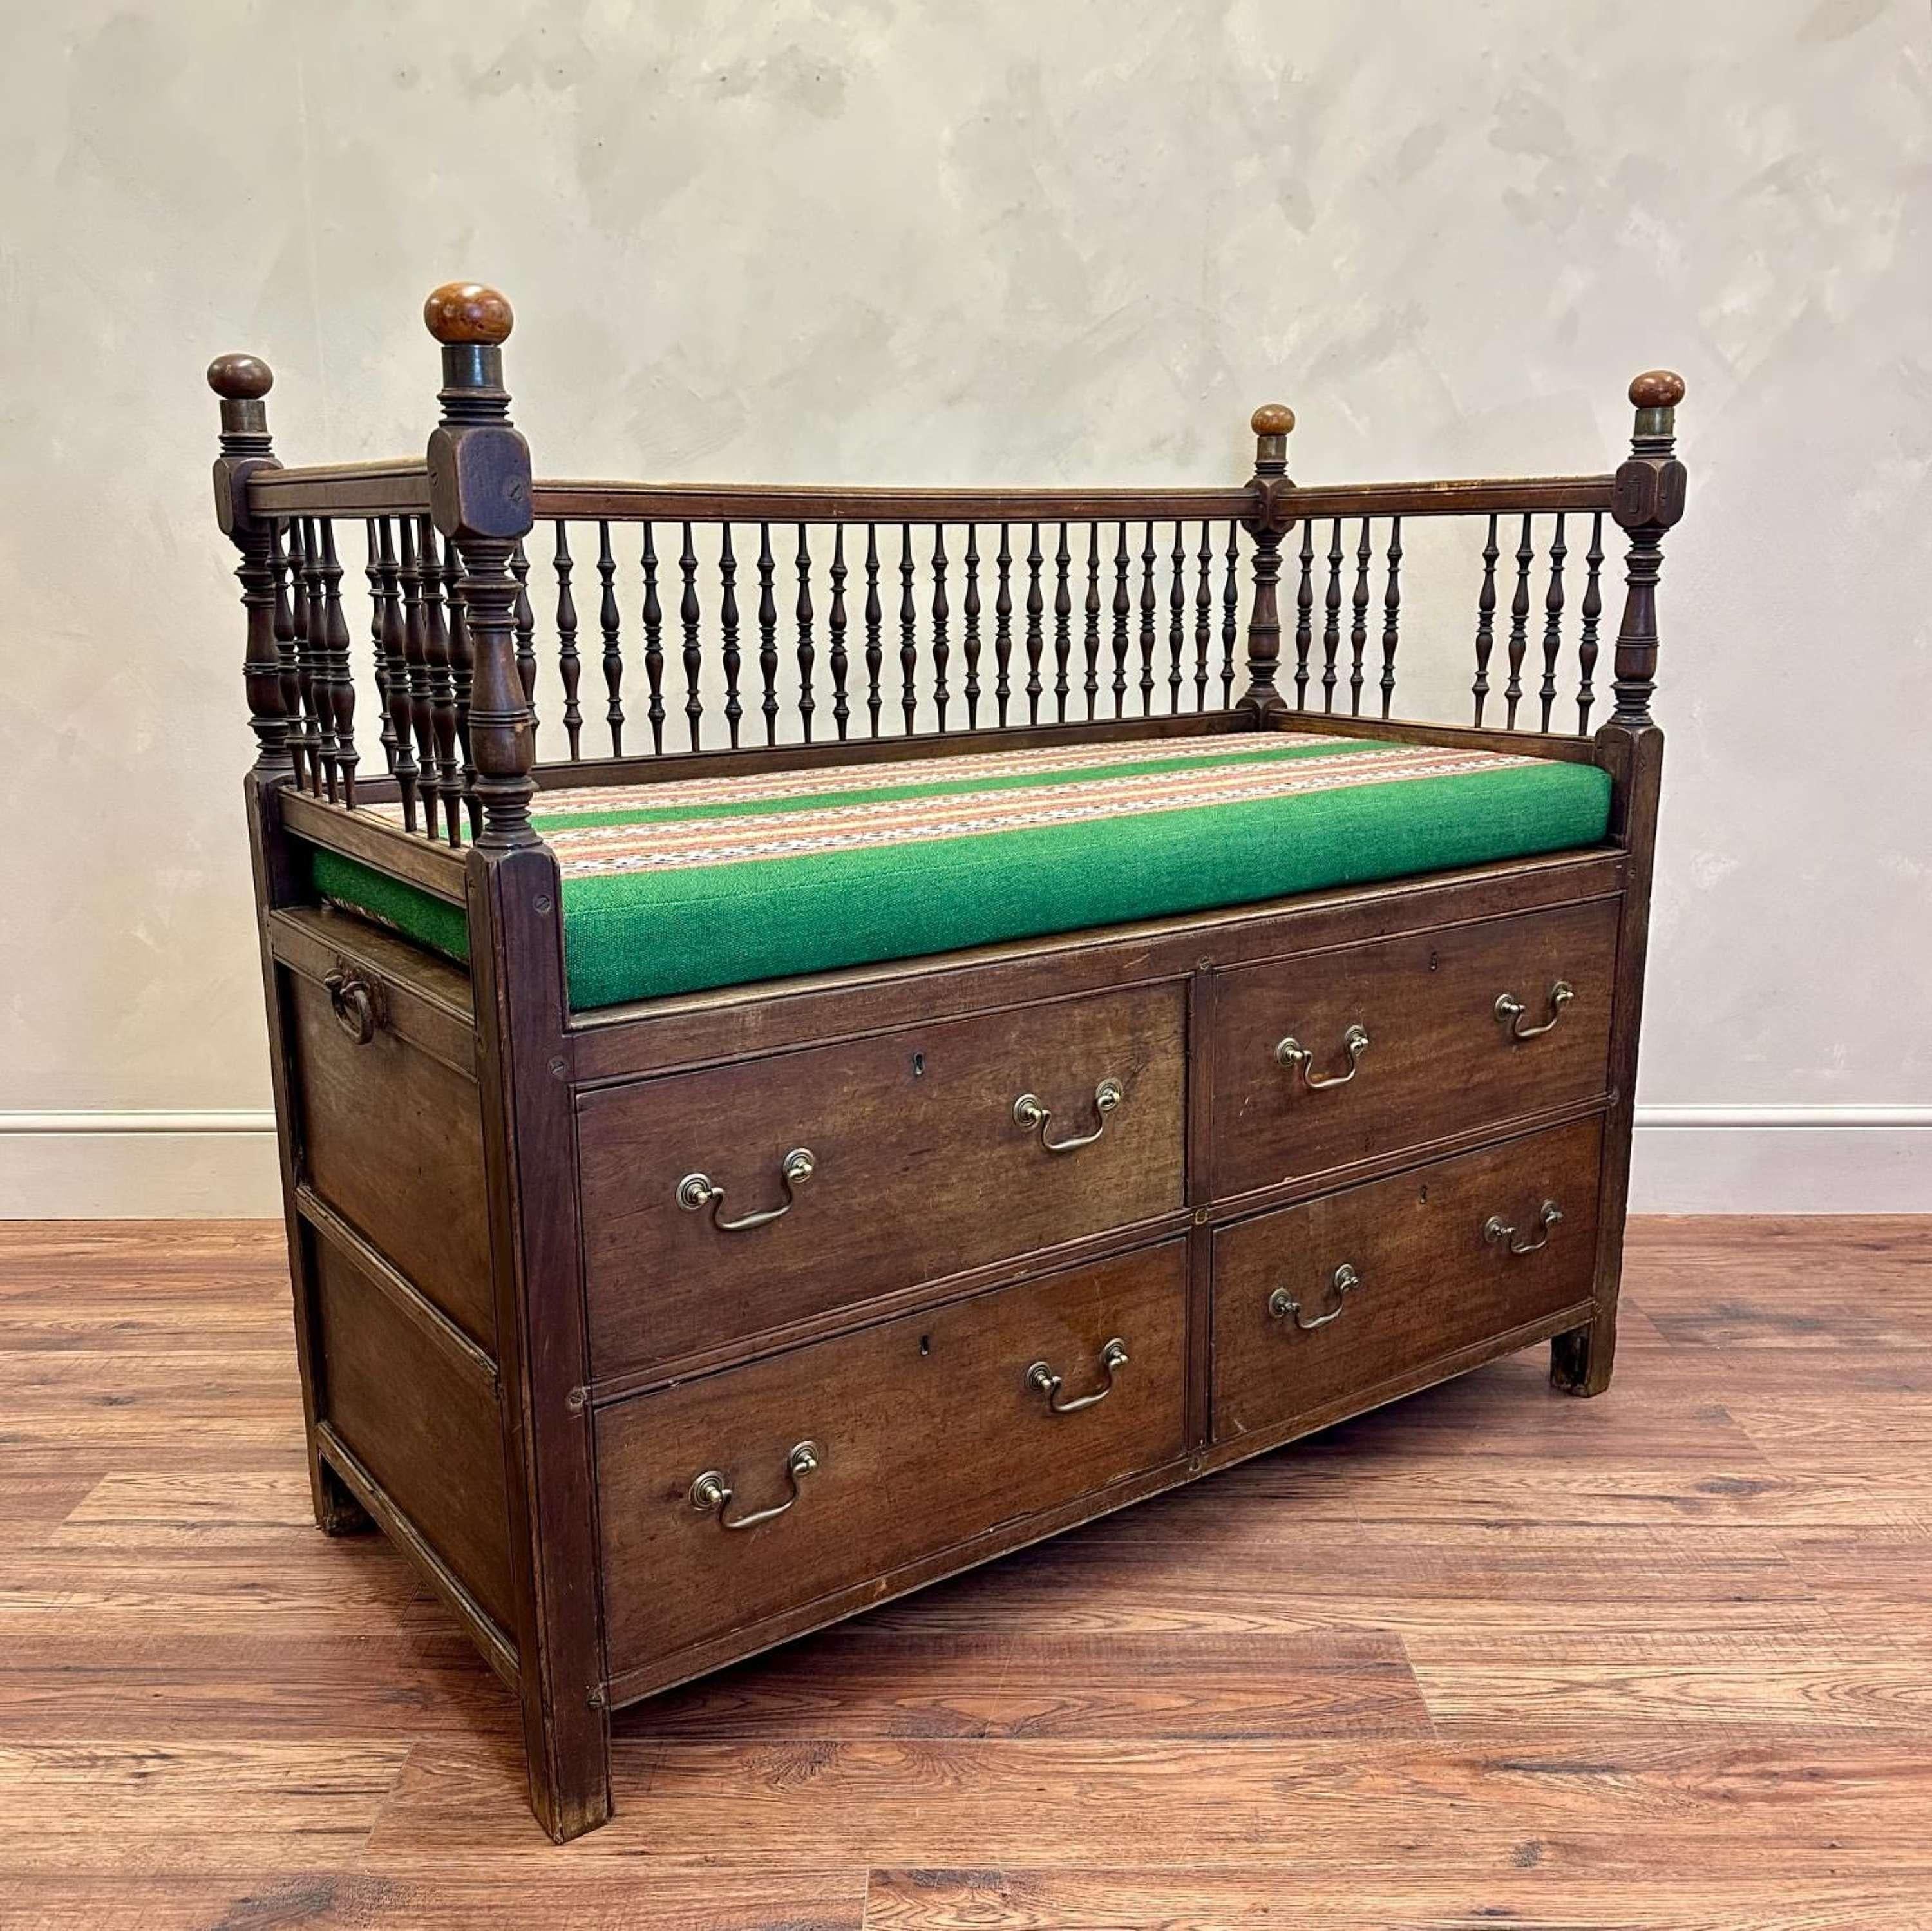 Rare 19th Century, Anglo Indian, walnut Campaign Settle.
This versitile piece of furniture would have travelled all over the world, made for the '1st Class' traveller.
As shown, an original shipping label remains, with the inscription: 'Mary J